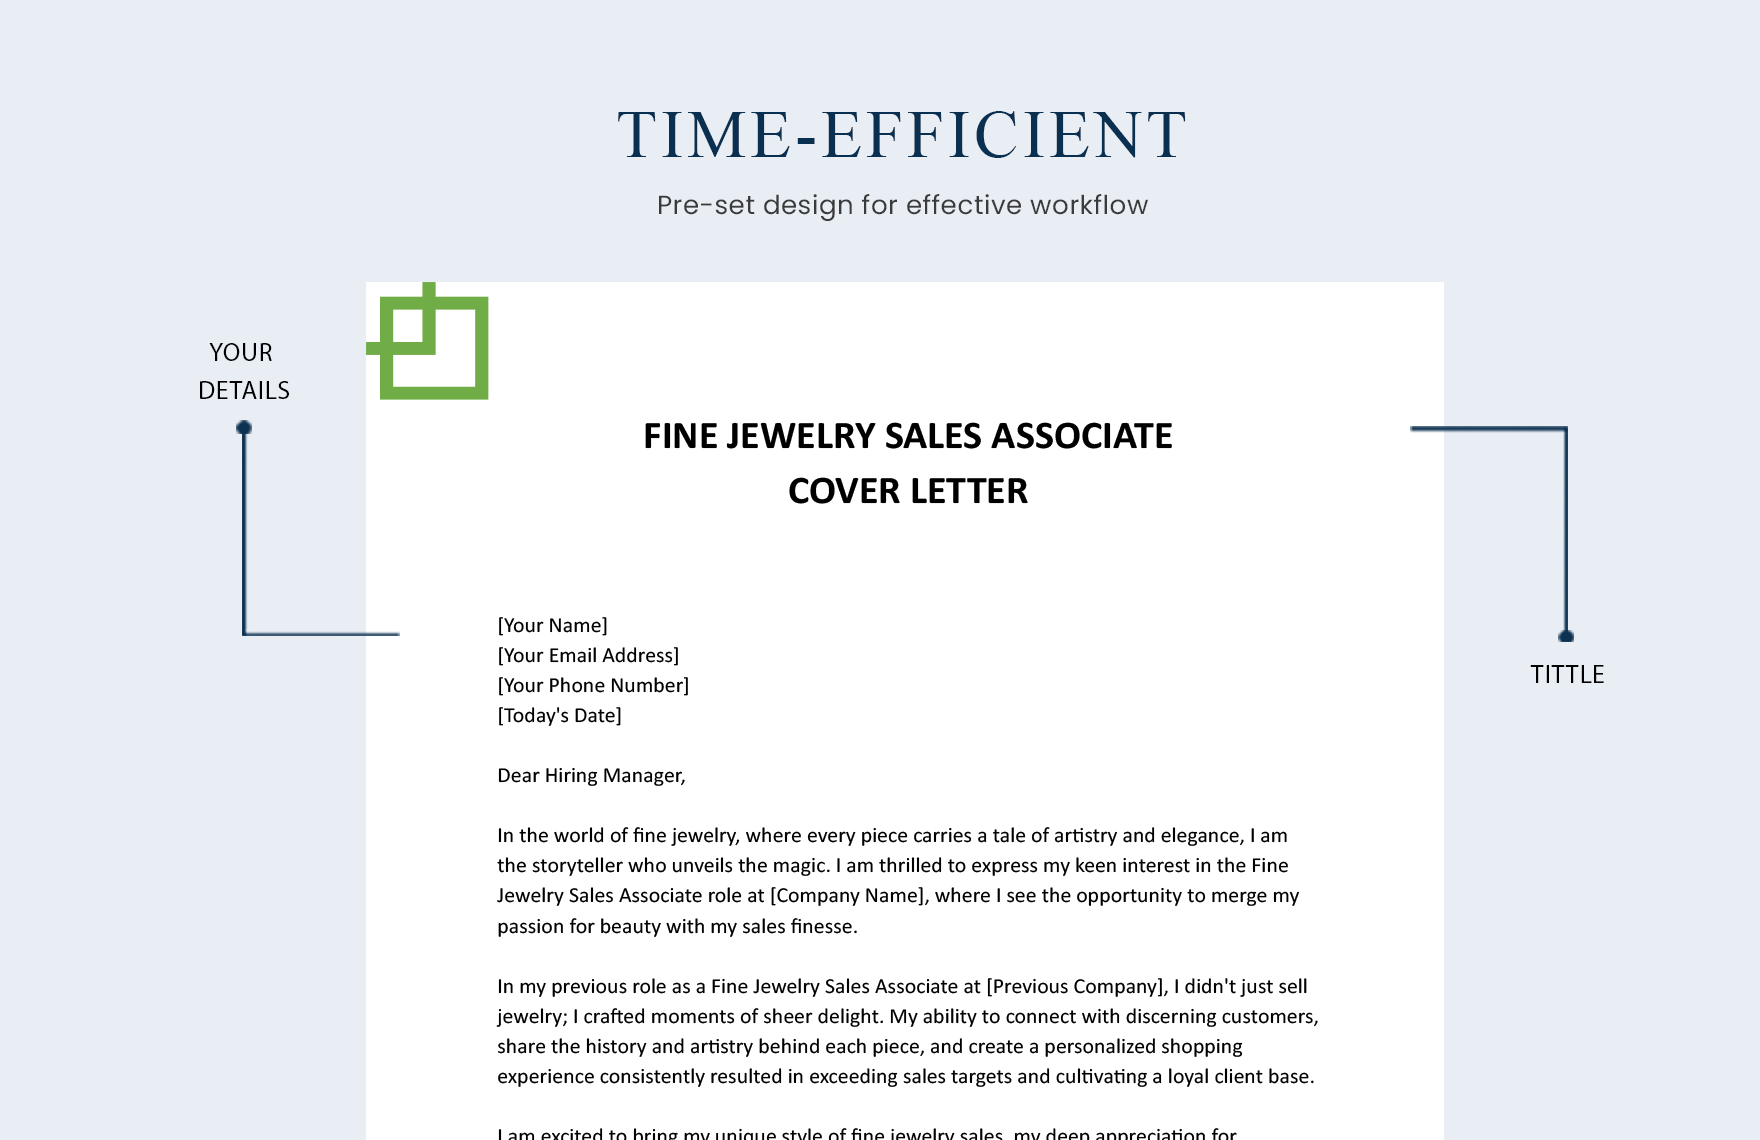 Fine Jewelry Sales Associate Cover Letter